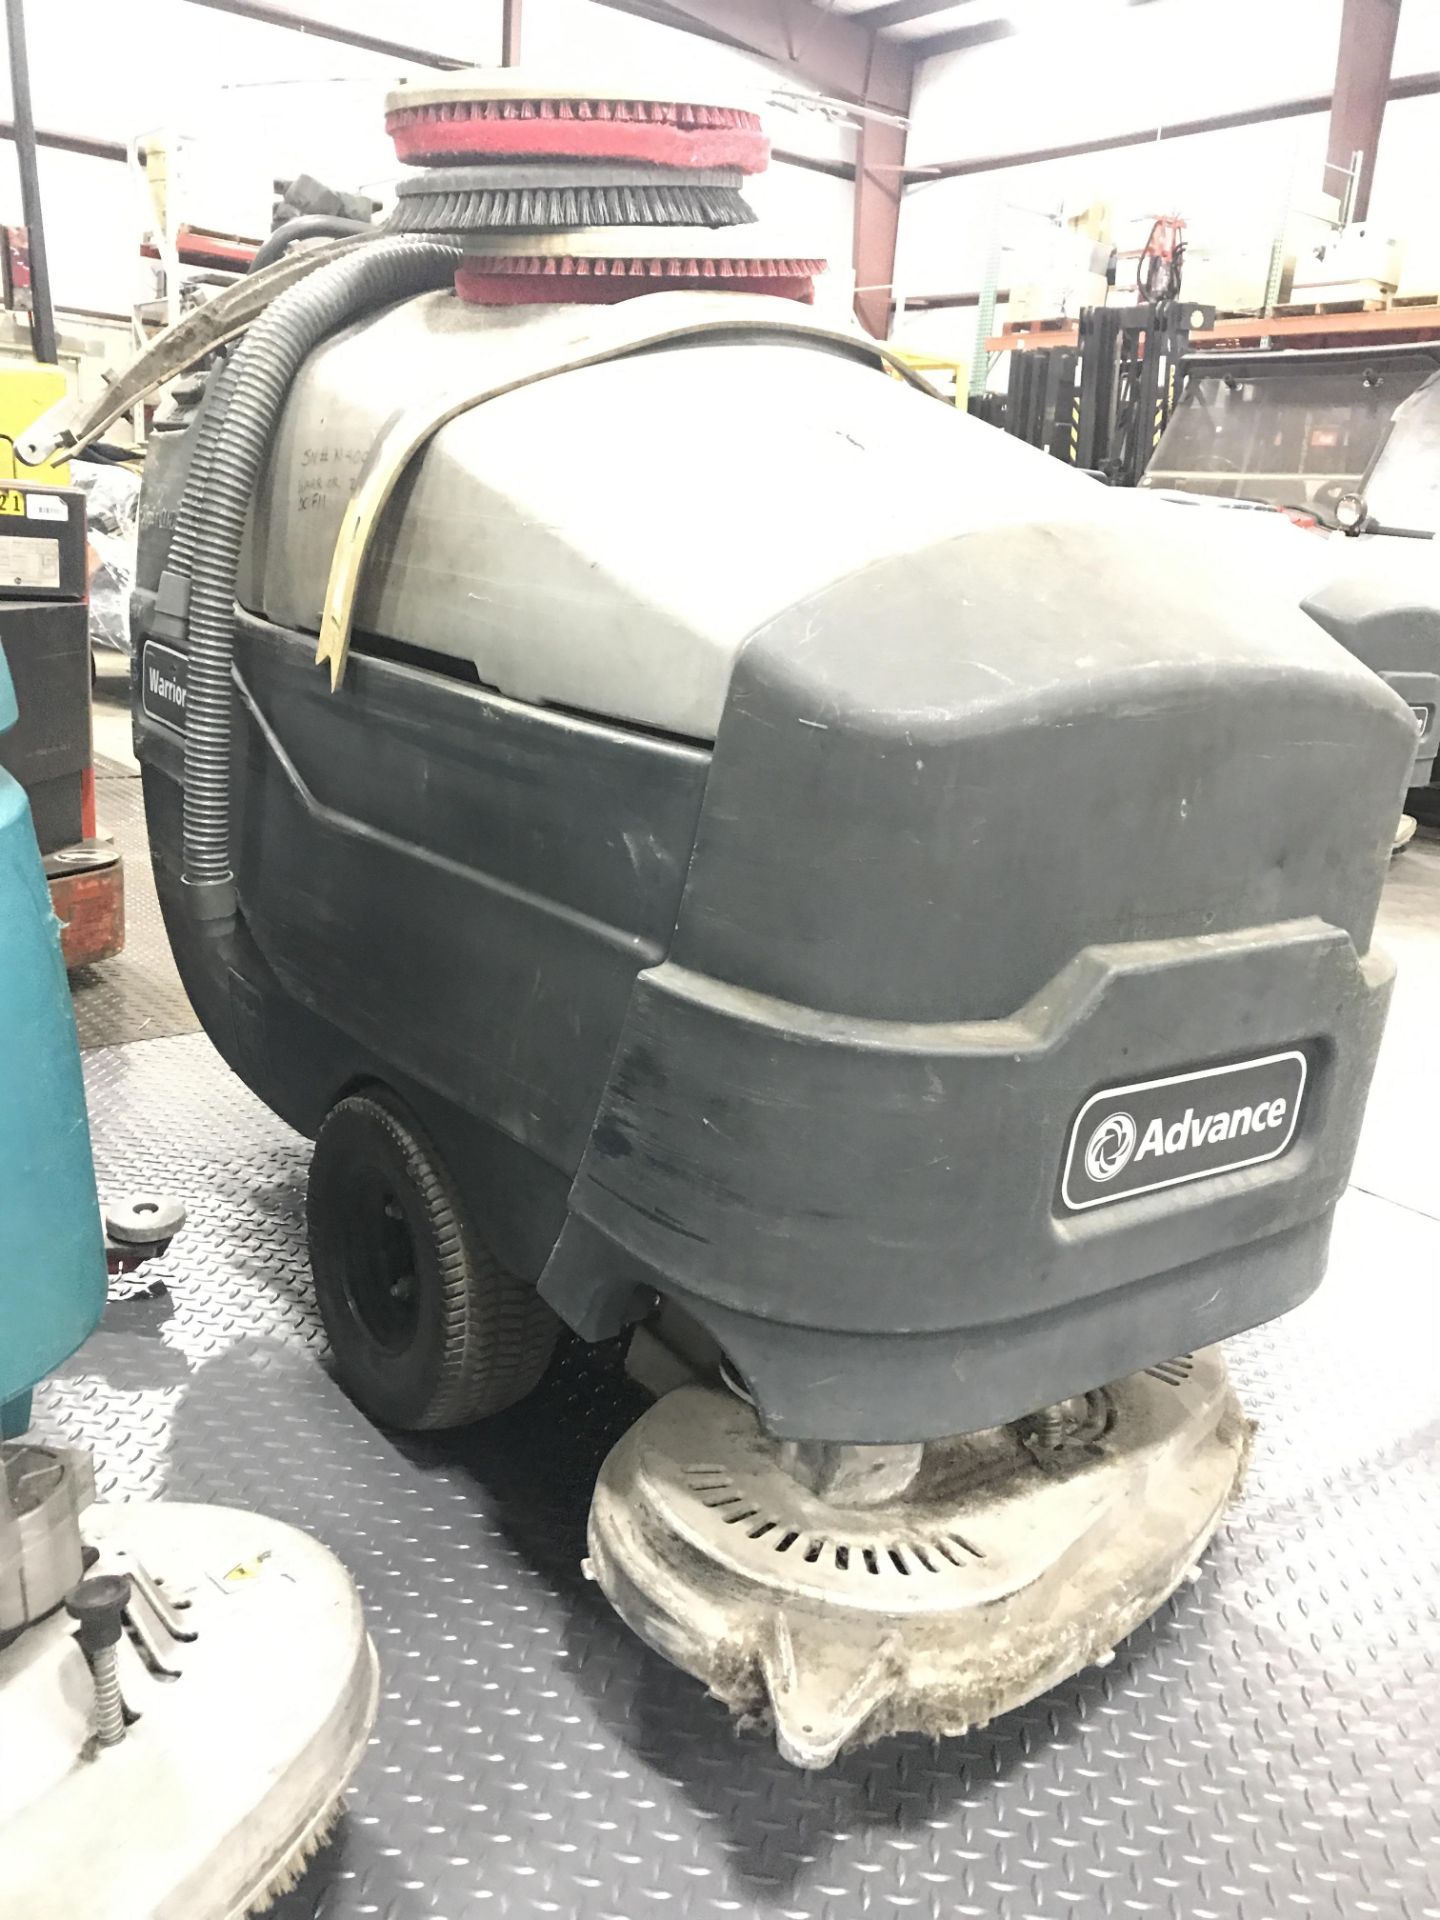 TENNANT ADVANCE WARRIOR ST. FLOOR SWEEPER/SCRUBBER, 623.1 HOURS SHOWING - Image 4 of 5